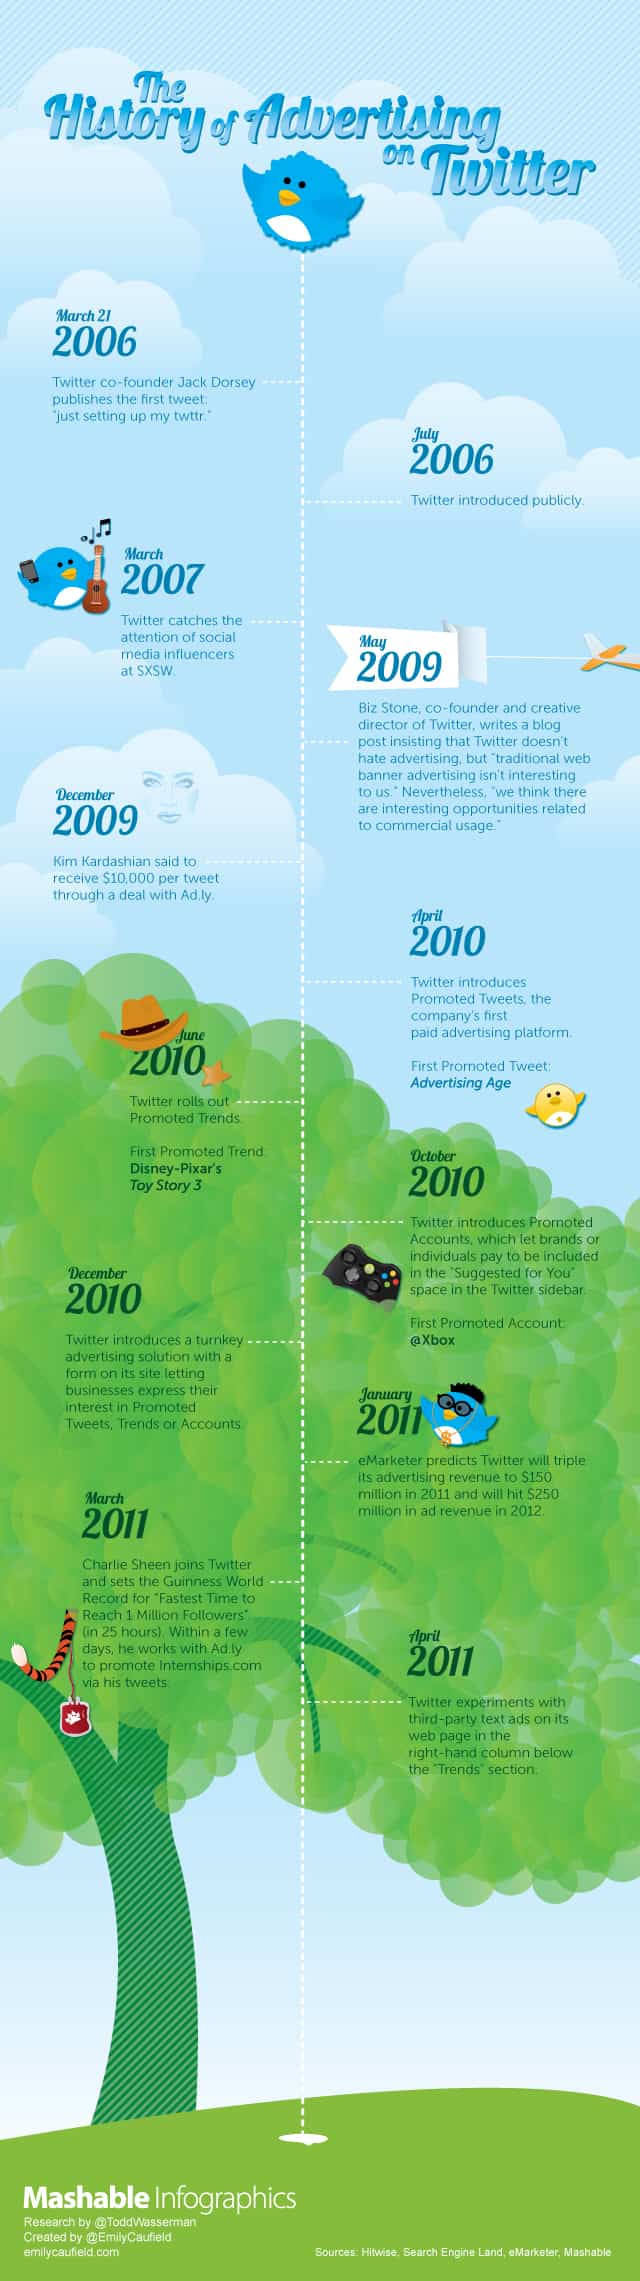 Mashable History of Twitter Advertising Infographic